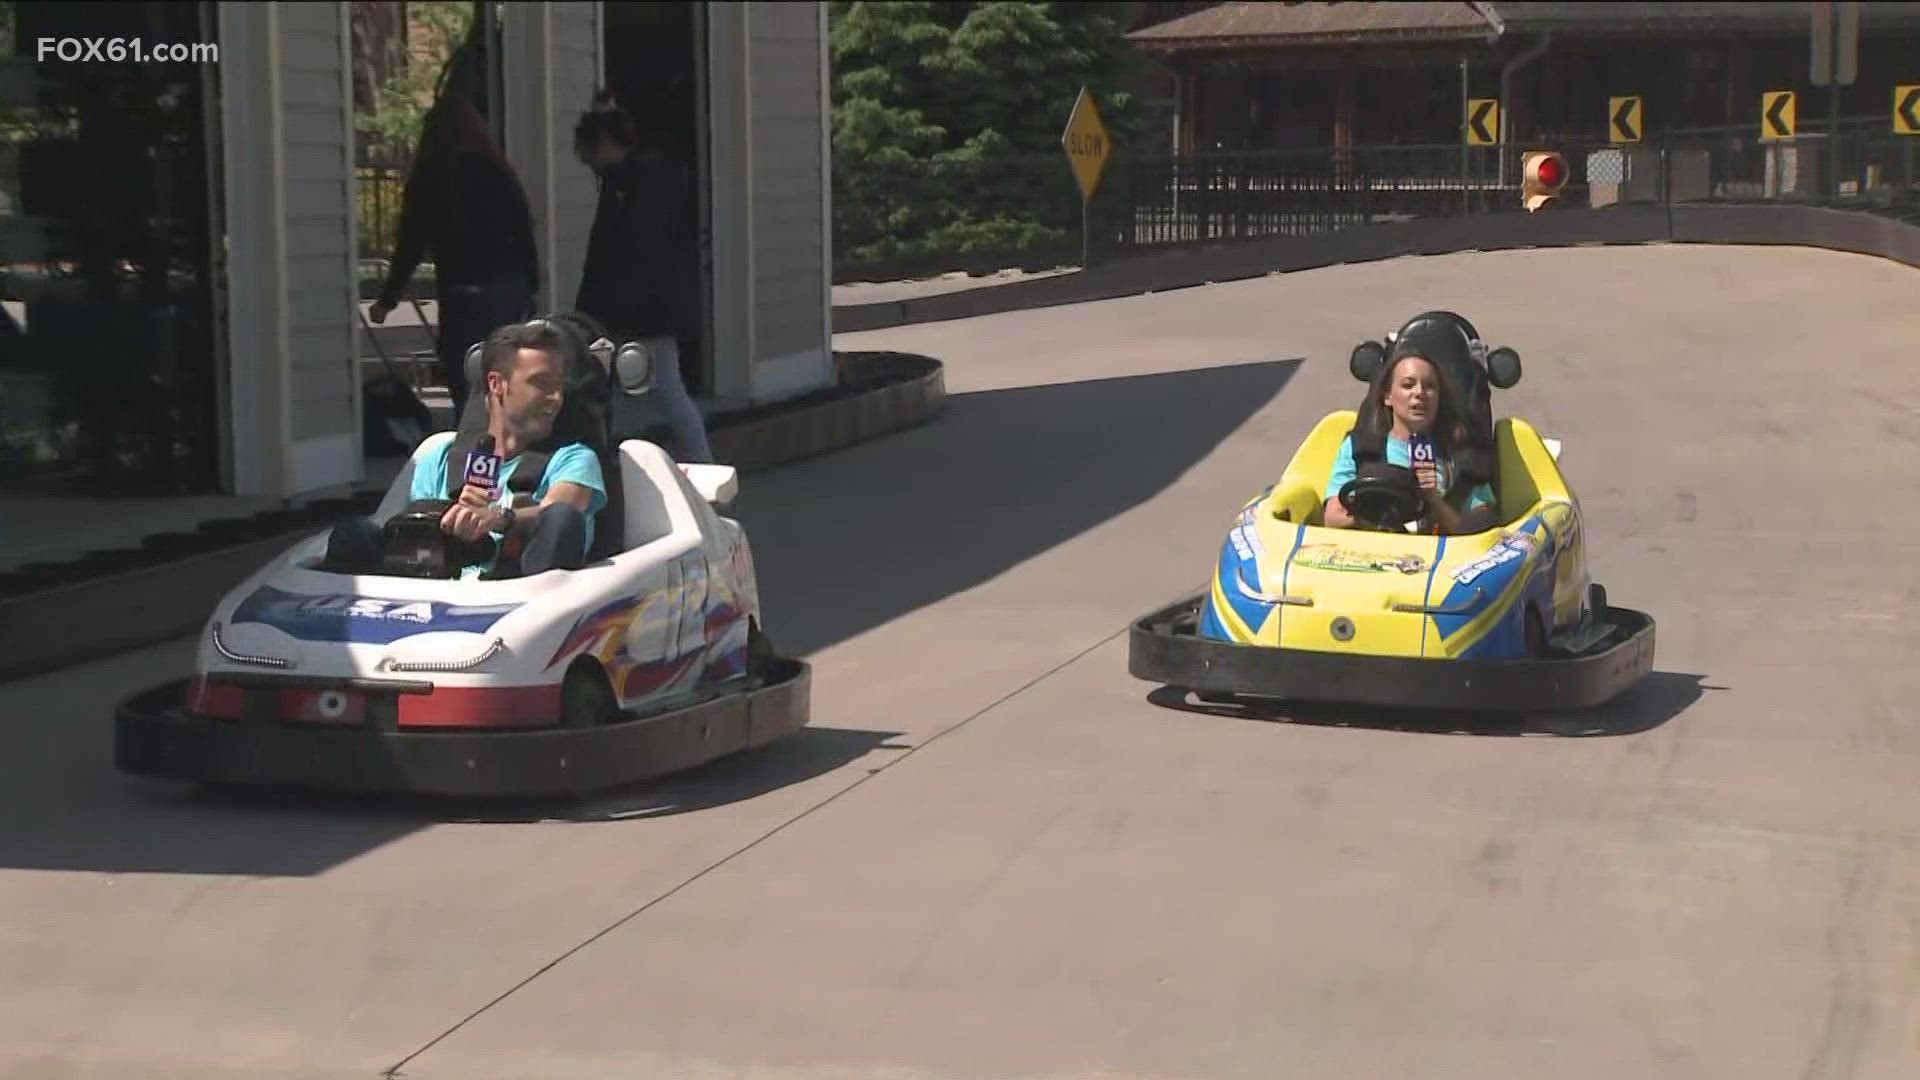 FOX61's Keith McGilvery and Rachel Piscitelli burn some rubber on the track at Sonny's Place in Somers for today's bucket list.